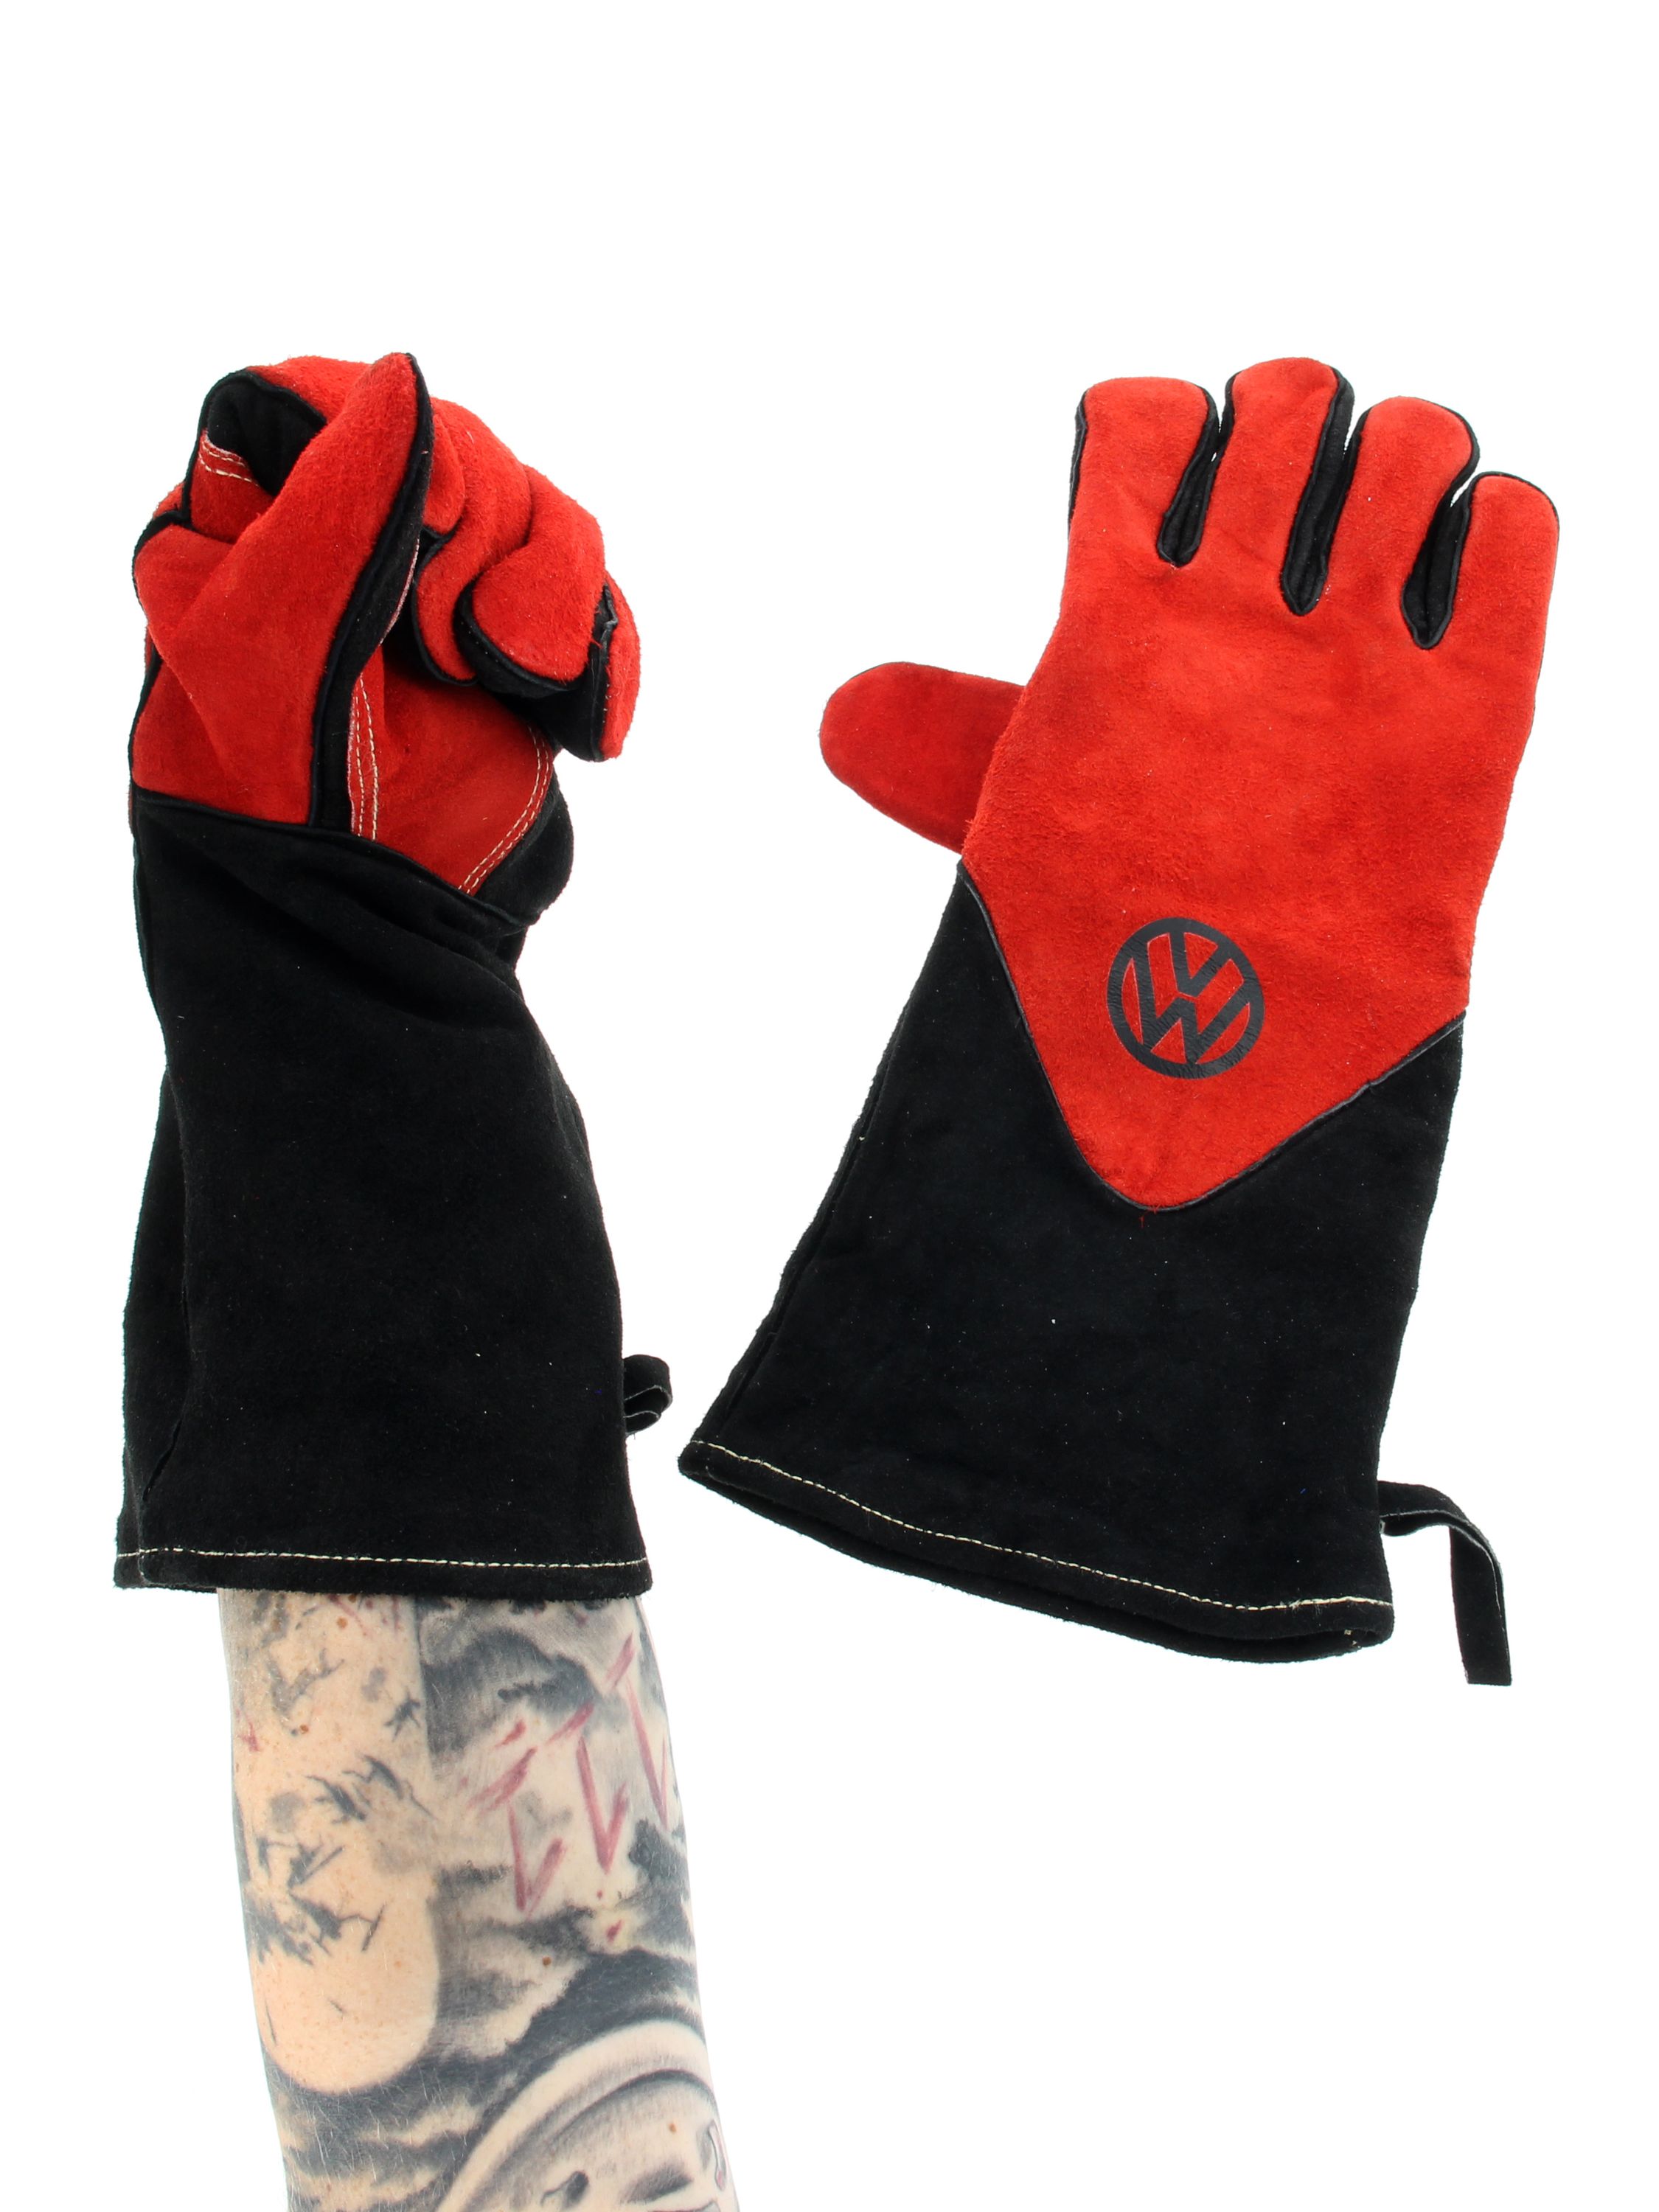 VW T1 Bus barbecue gloves in gift box cowhide (pair)